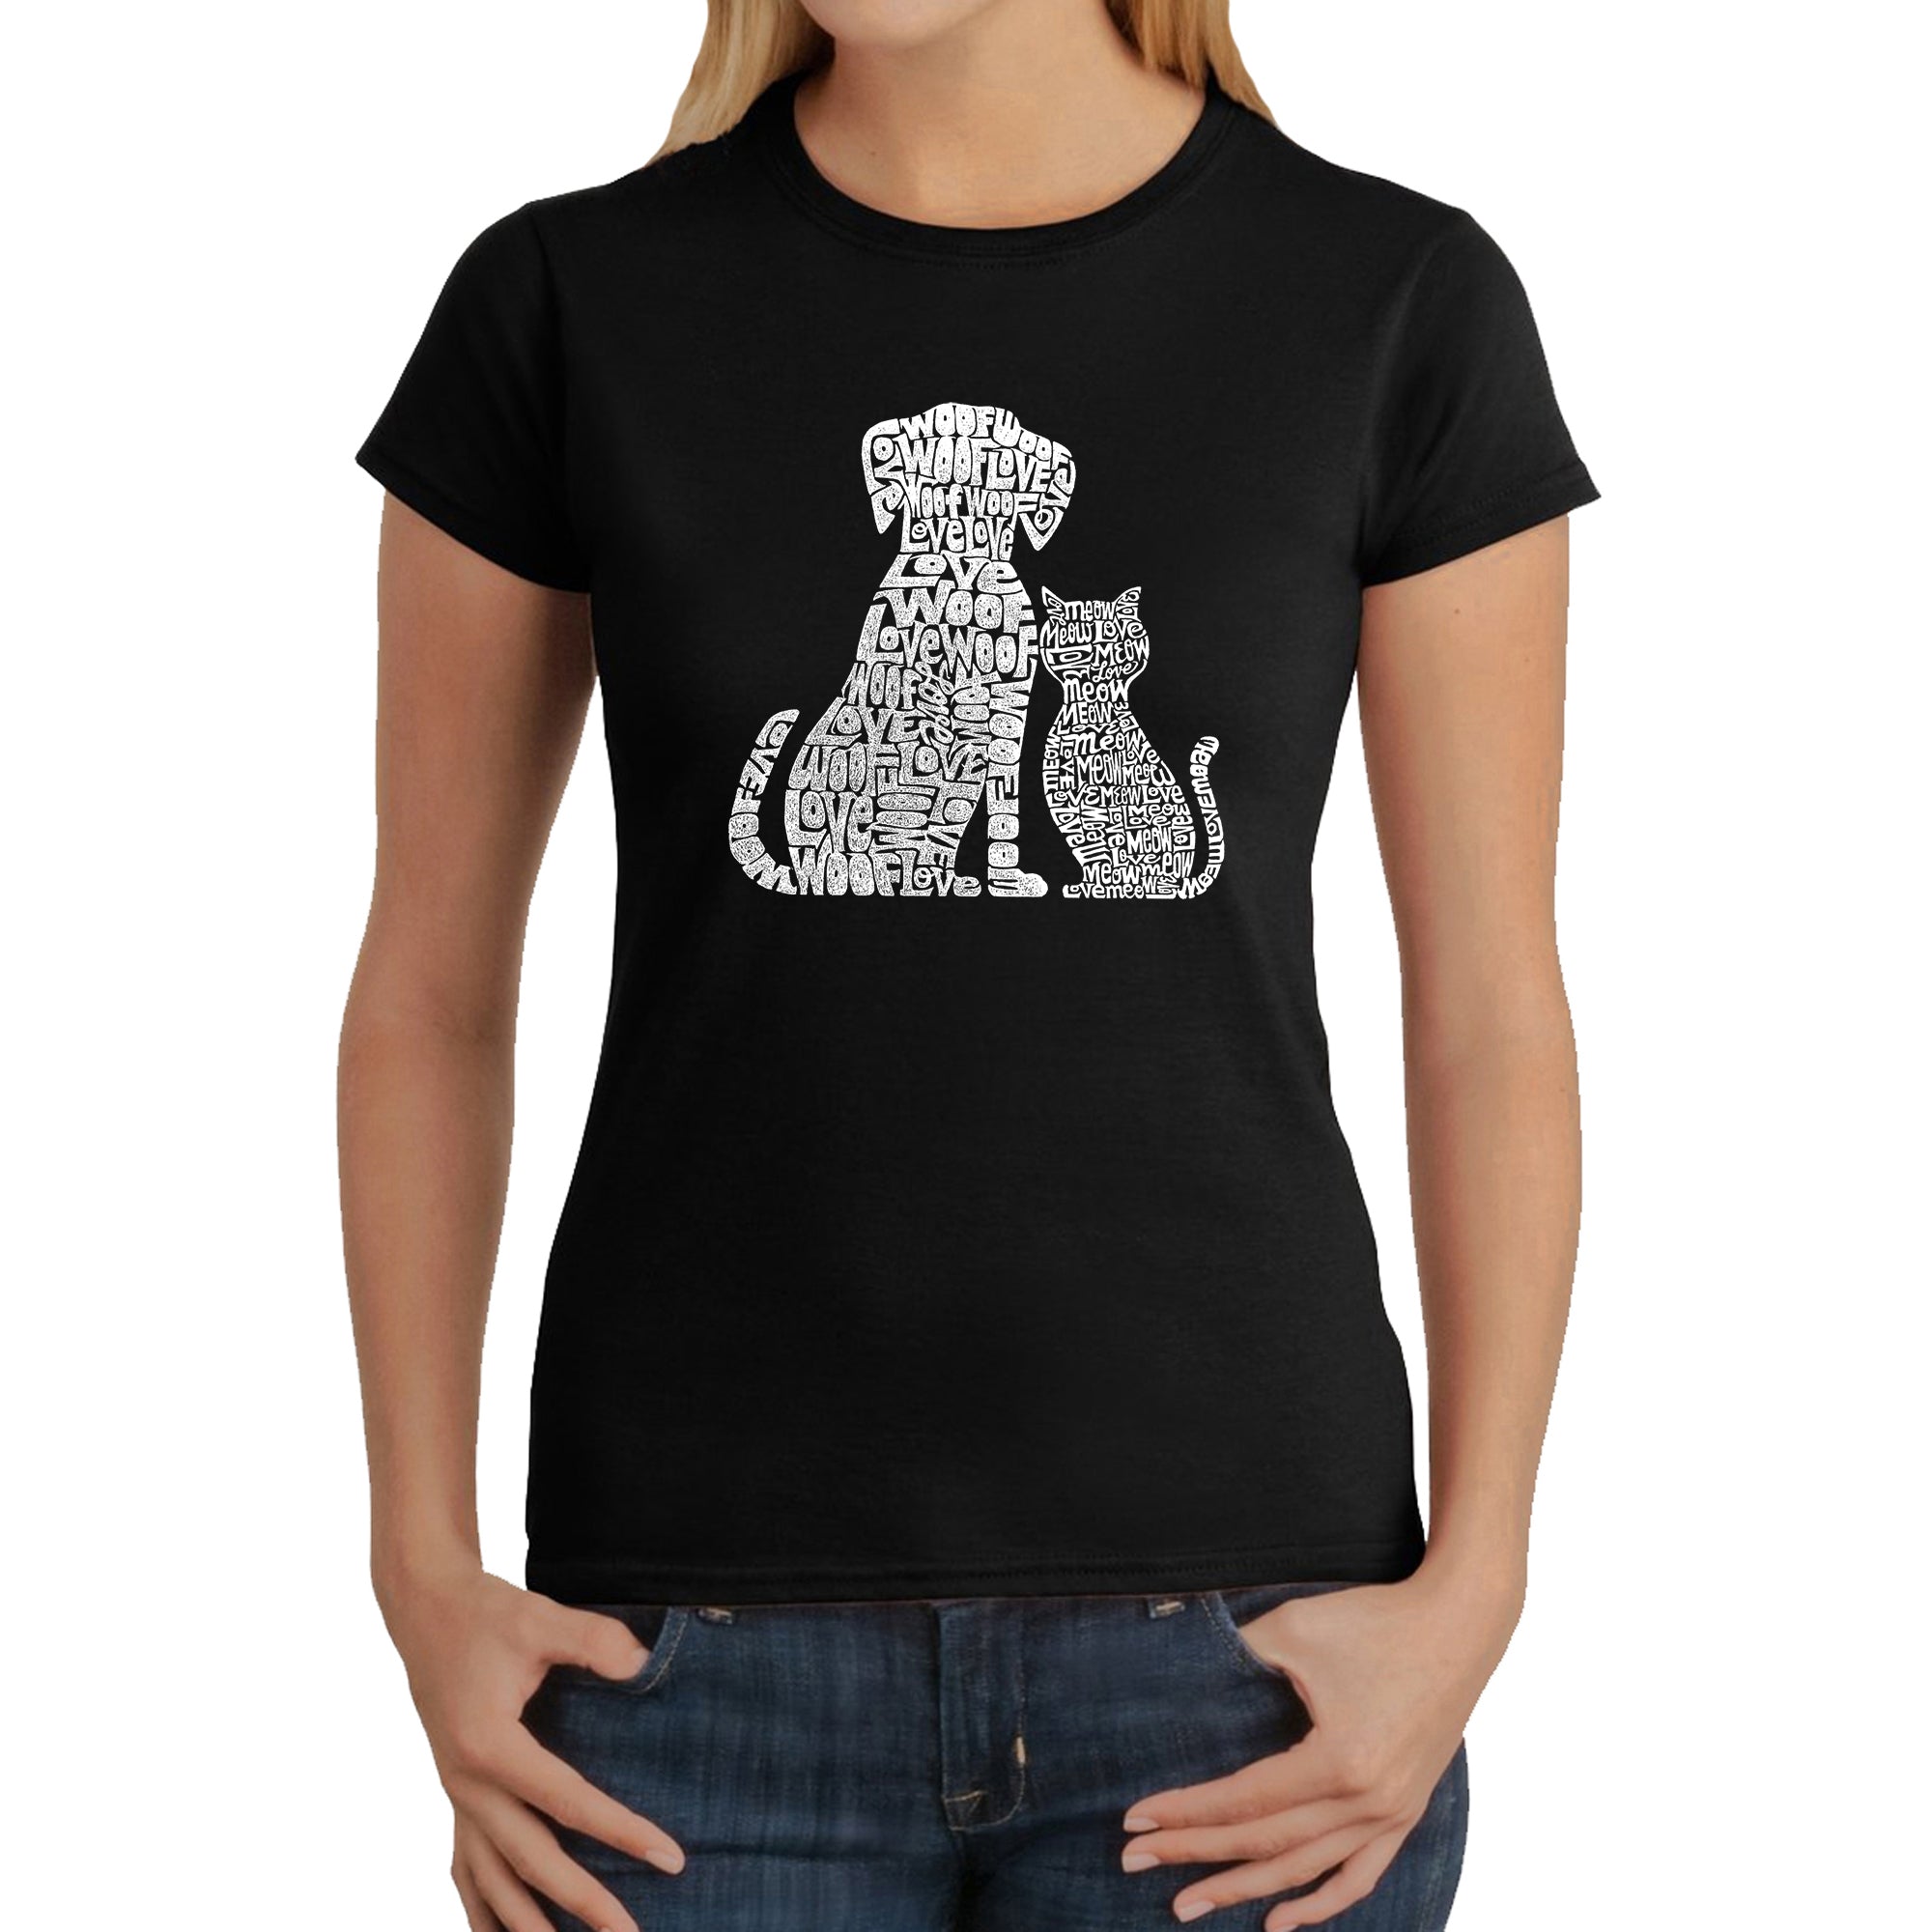 Dogs And Cats - Women's Word Art T-Shirt - Navy - XS